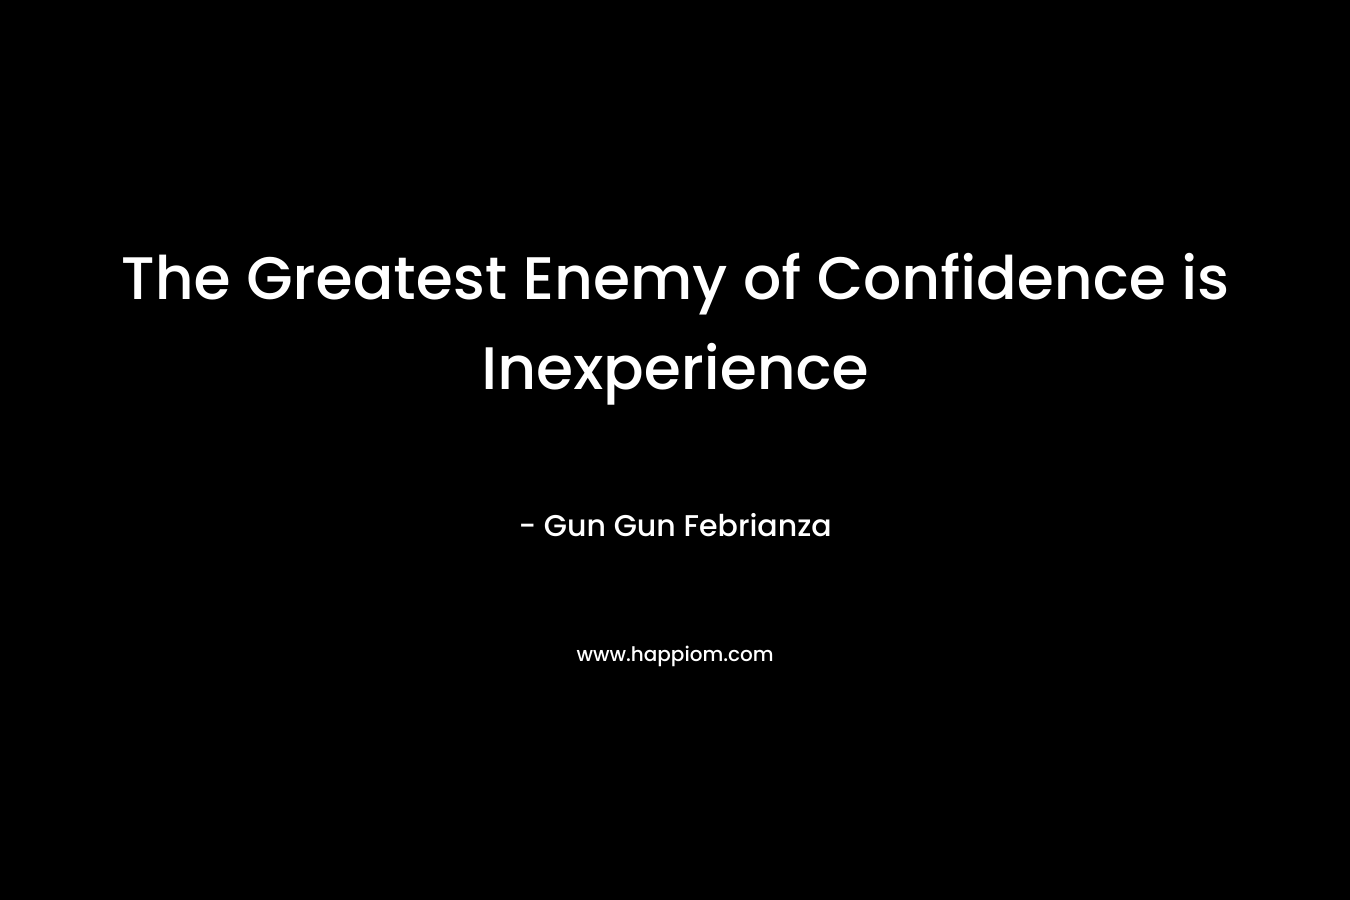 The Greatest Enemy of Confidence is Inexperience